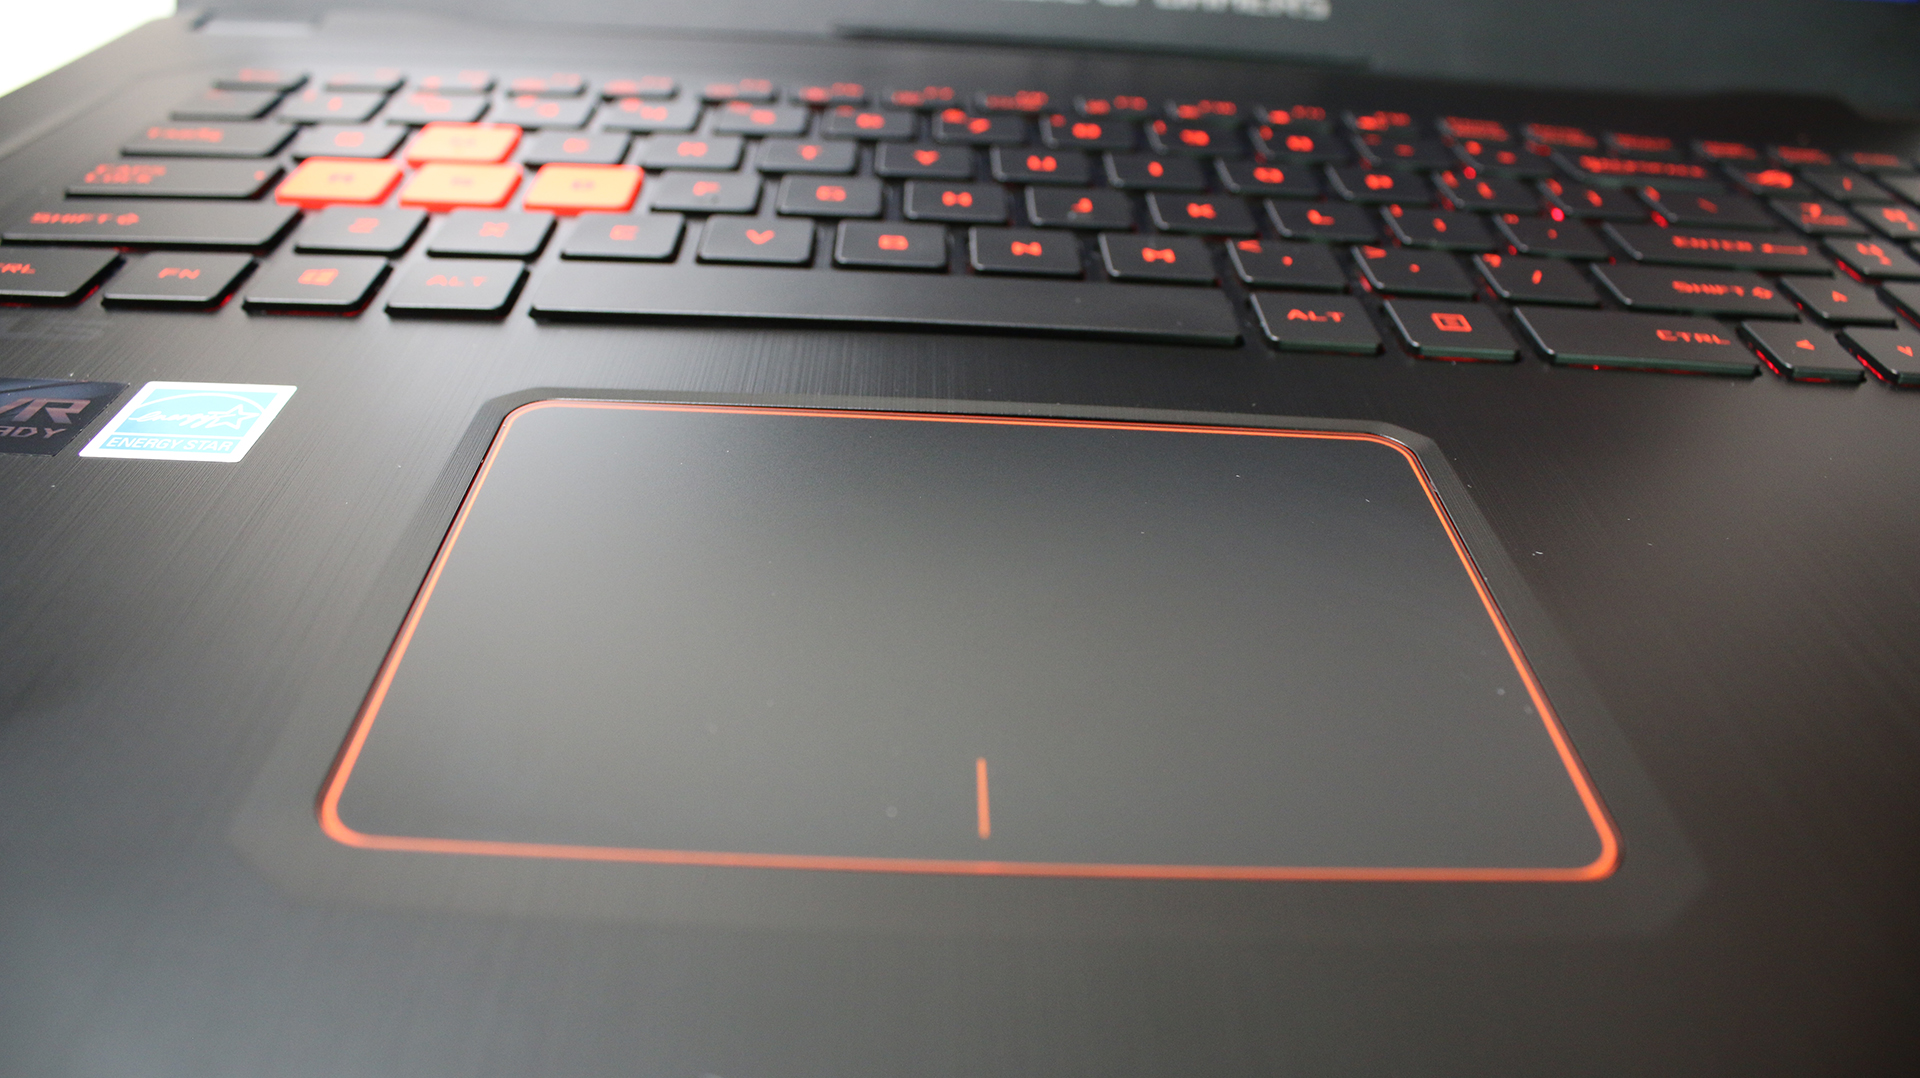 Asus Gl702M Gaming Notebook (Hardware) Review 11